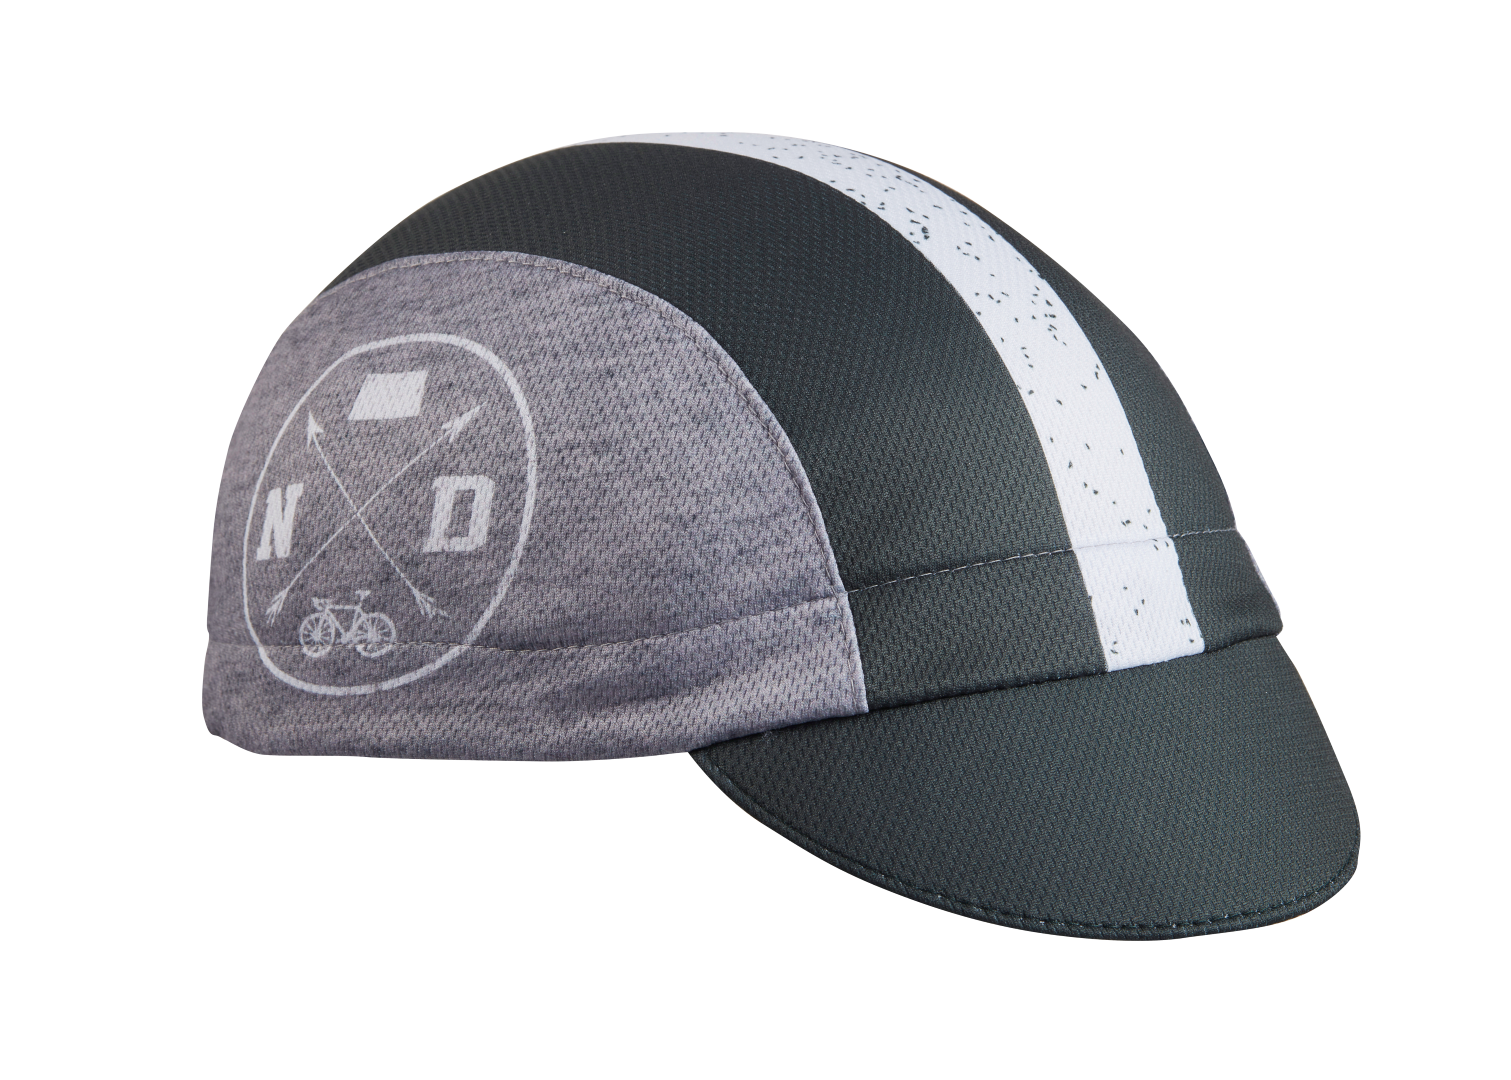 North Dakota Technical 3-Panel Cycling Cap.  Black and gray cap with white stripe and ND icons on side.  Angled view.